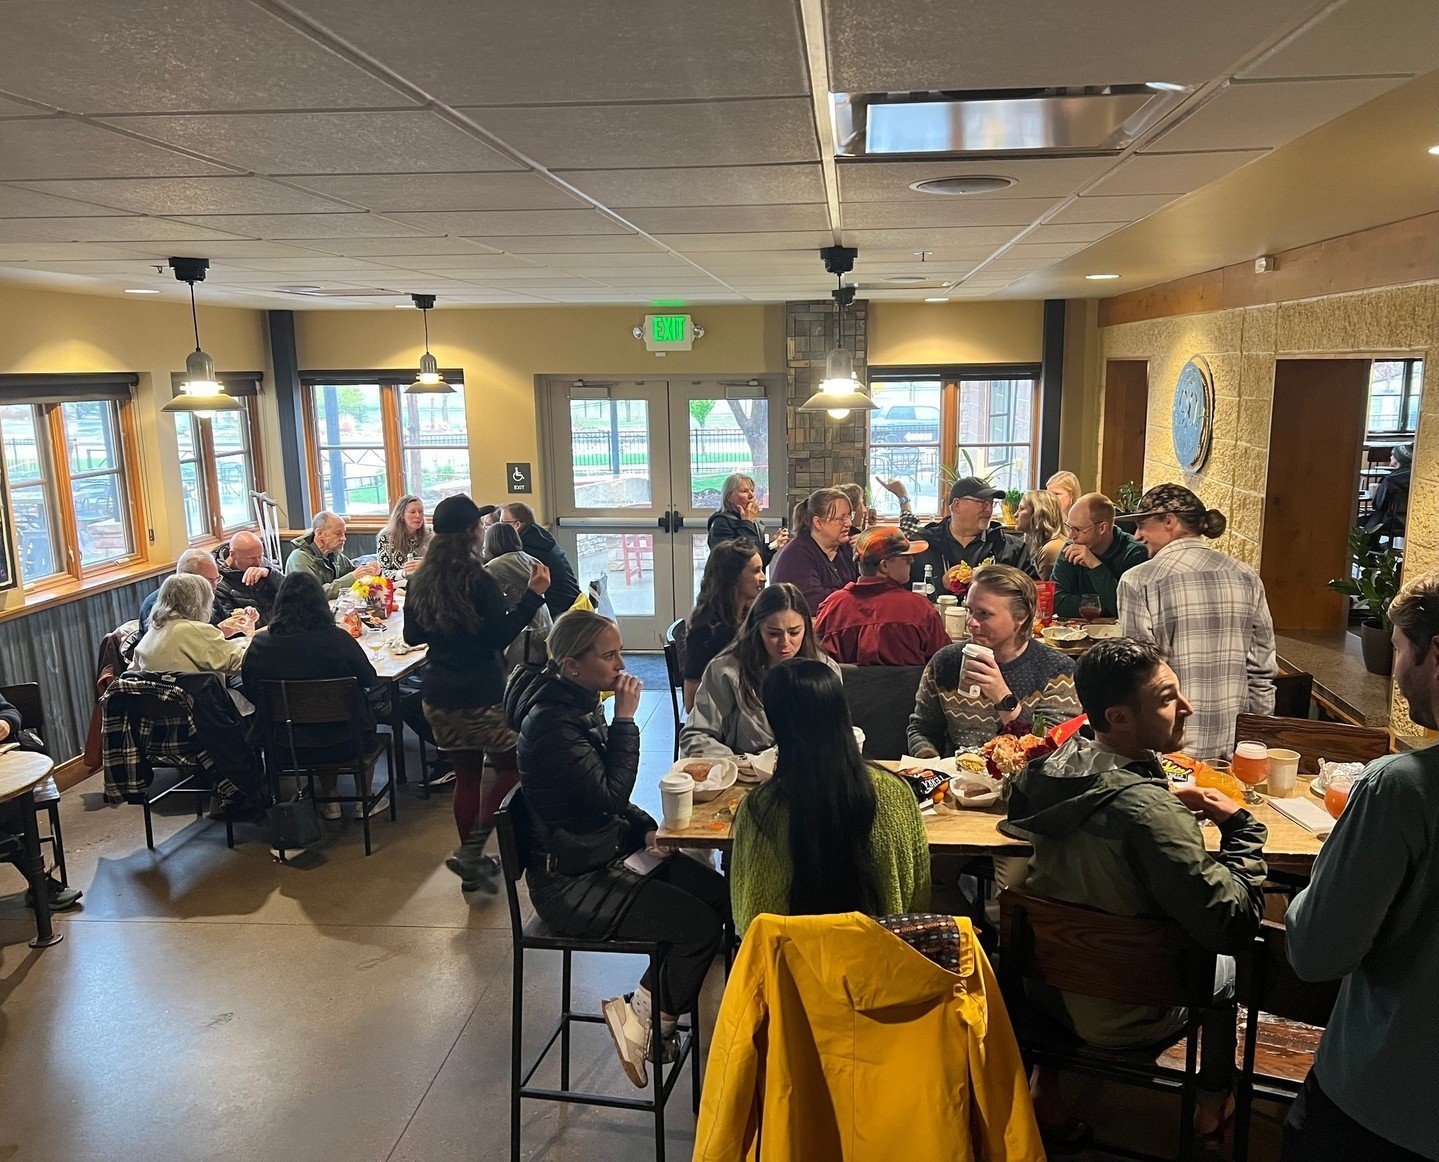 Our 4th annual Brunch in the books! Thanks everyone for coming out on a rainy morning to hang out! Big shoutout to @odellbrewing for having us again and @olliesmalasadas @foodtruckeldon @theeverhousecoffeeco and @say_uncle_band for taking good care o